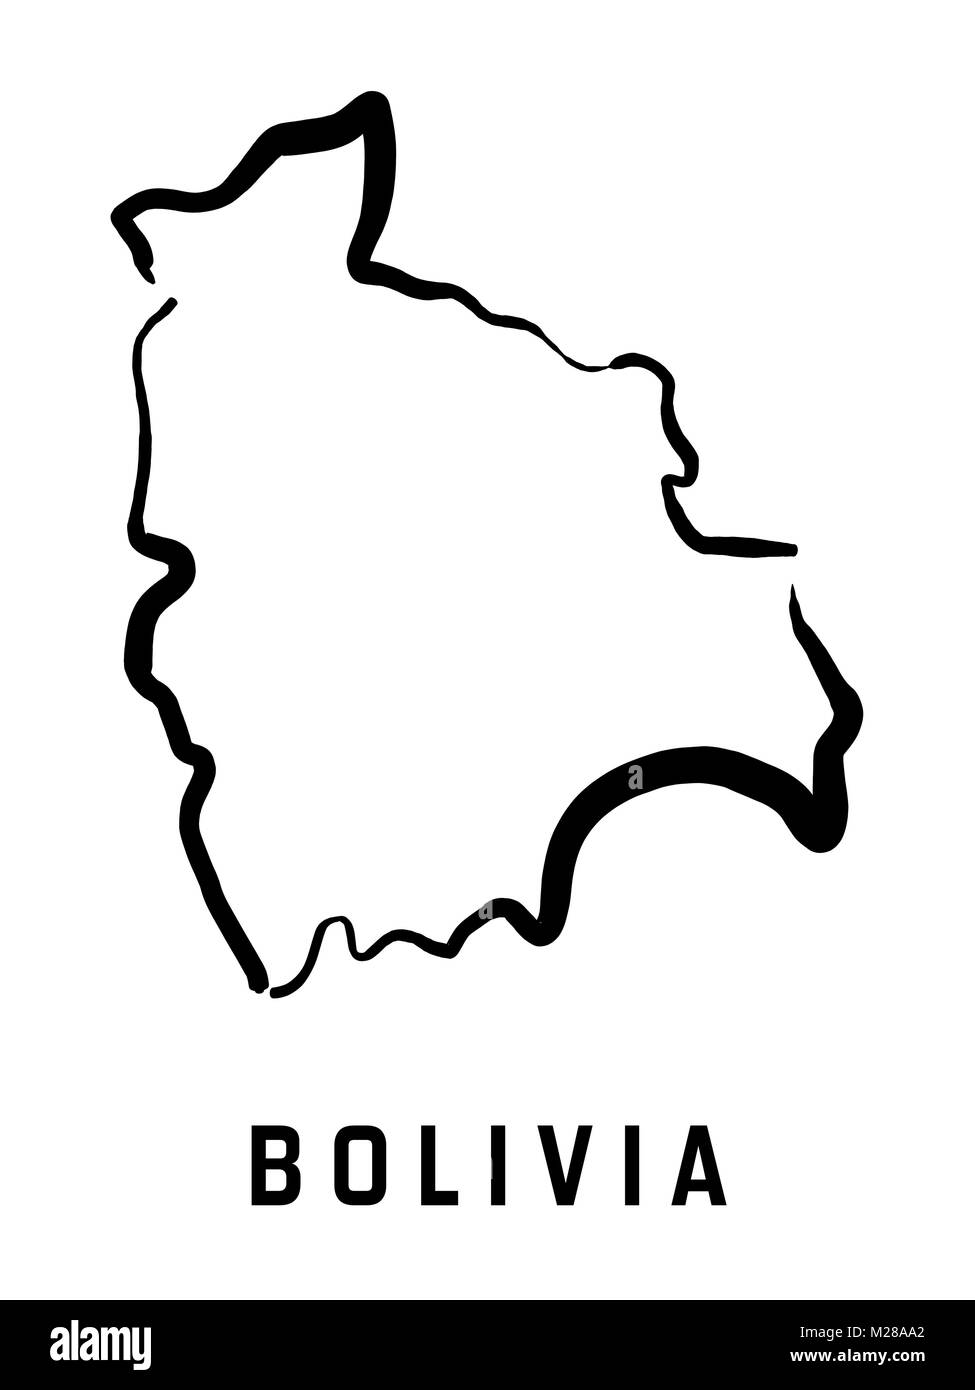 Bolivia map outline - smooth simplified country shape map vector. Stock Vector